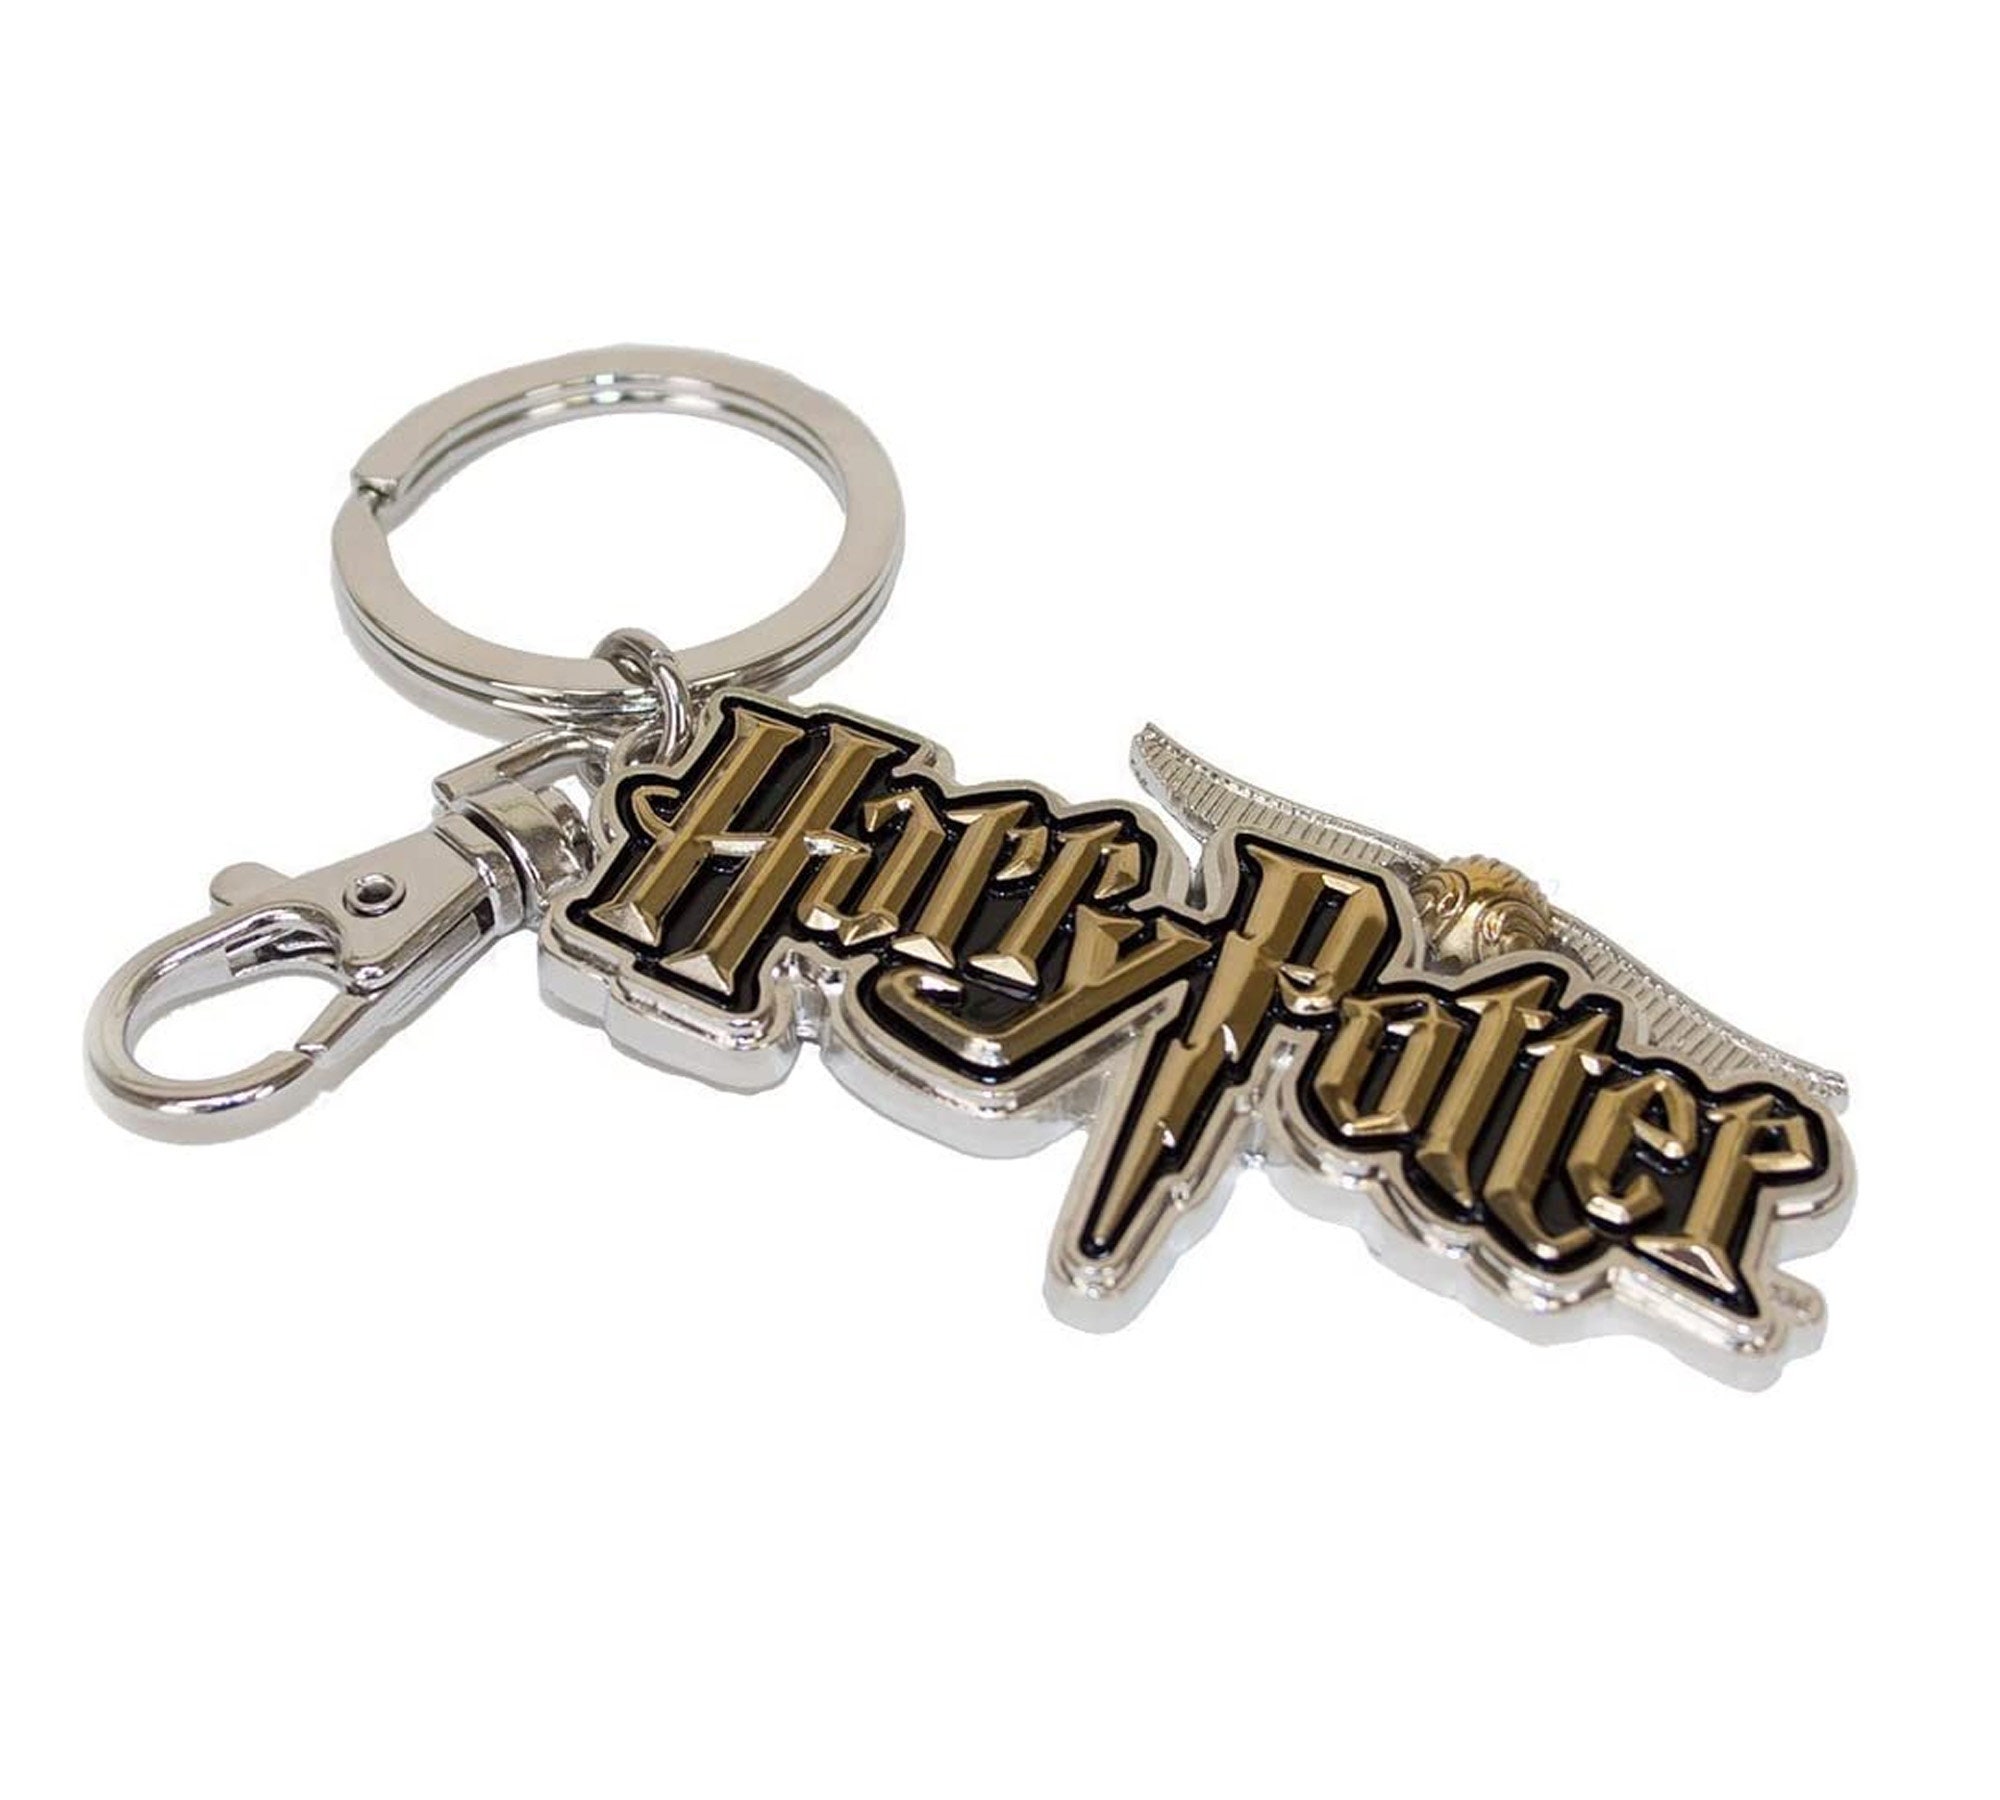 Harry Potter Ministry of Magic Seal Stamp Pewter Key Chain